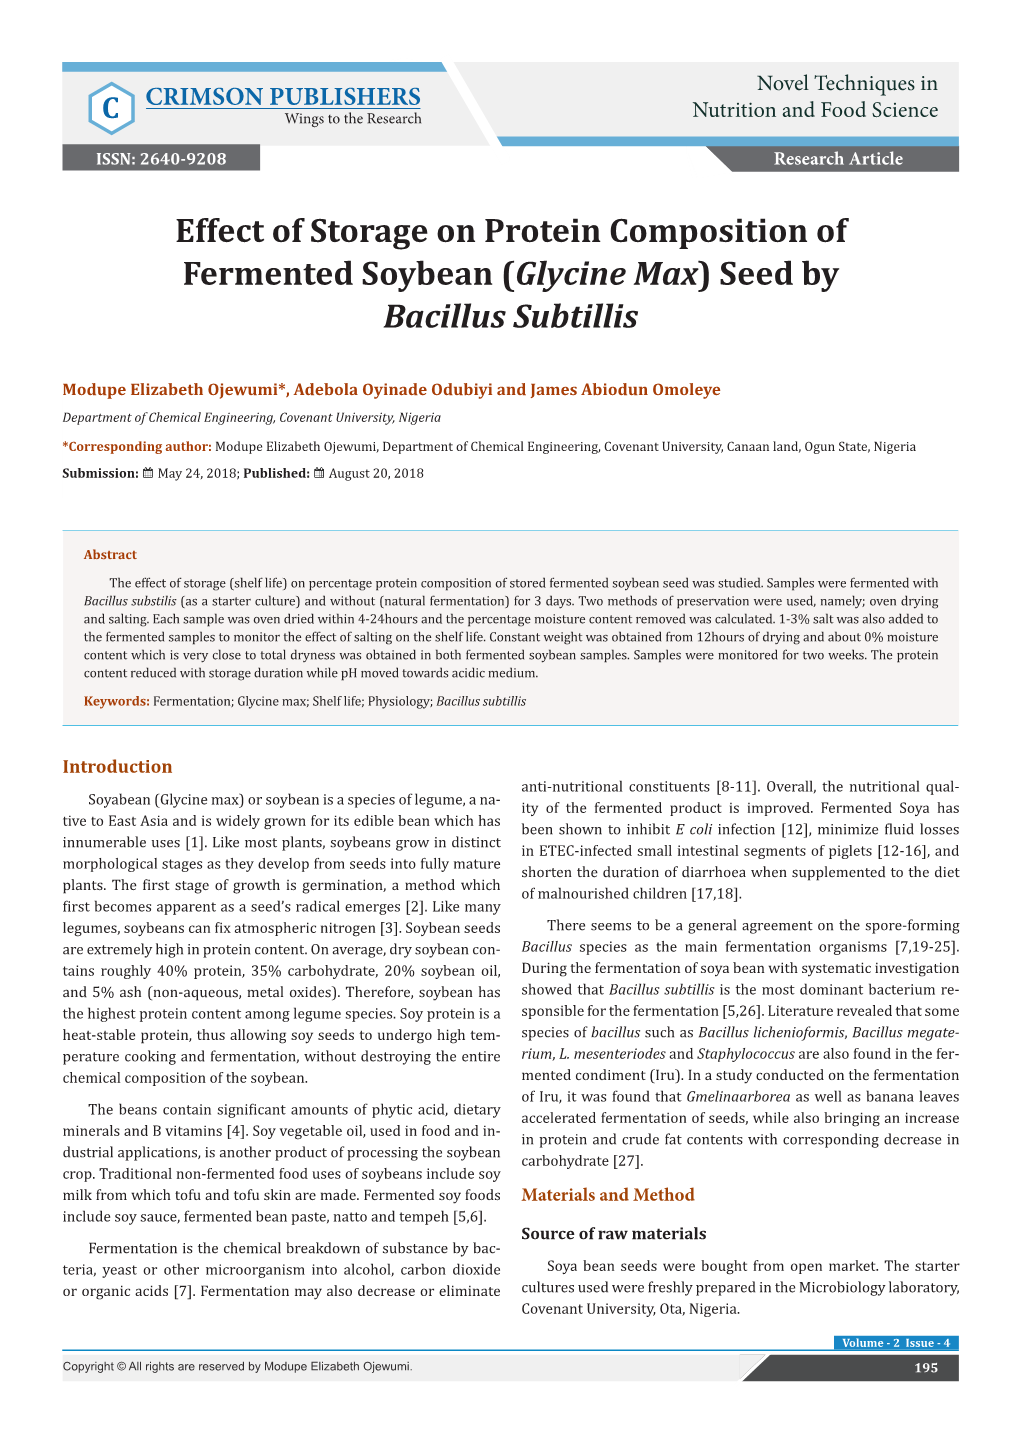 Effect of Storage on Protein Composition of Fermented Soybean (Glycine Max) Seed by Bacillus Subtillis